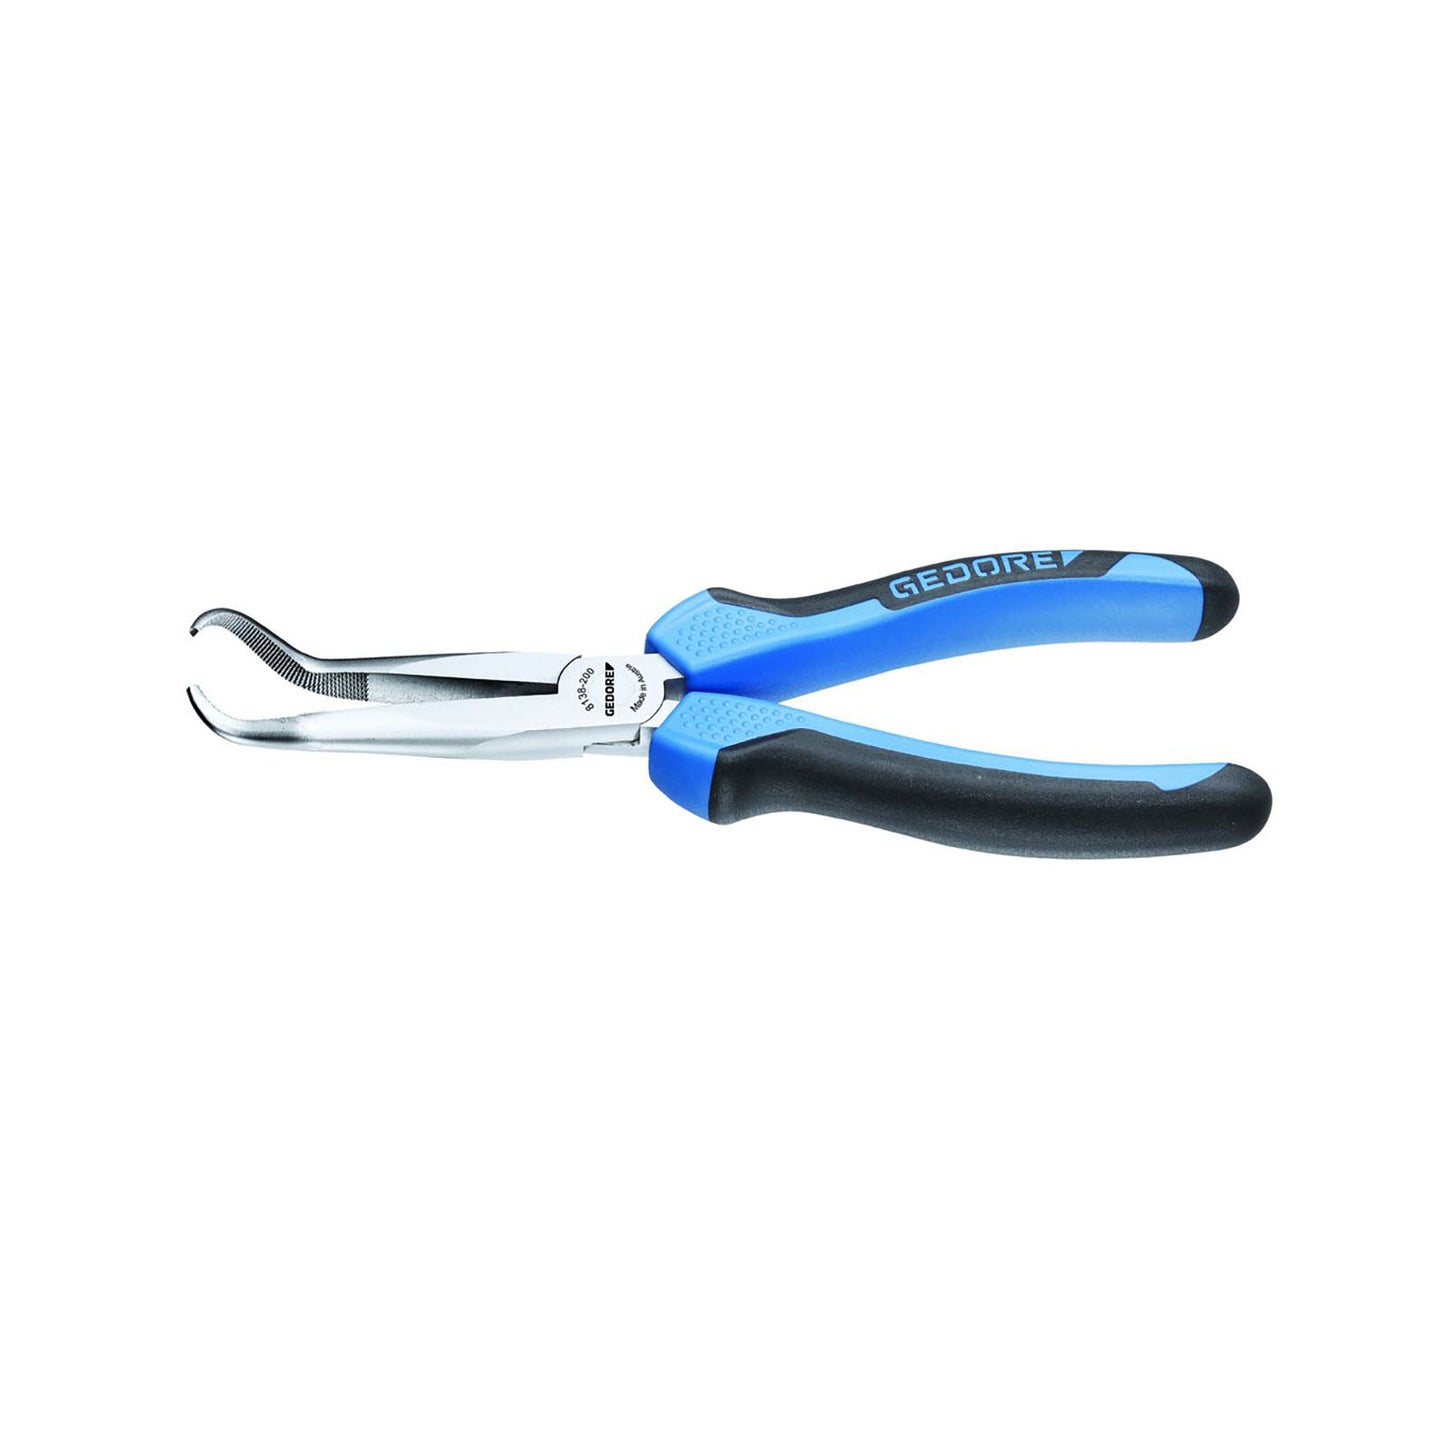 GEDORE 8138-200 JC - Angled non-cutting pliers 200mm (6723350)